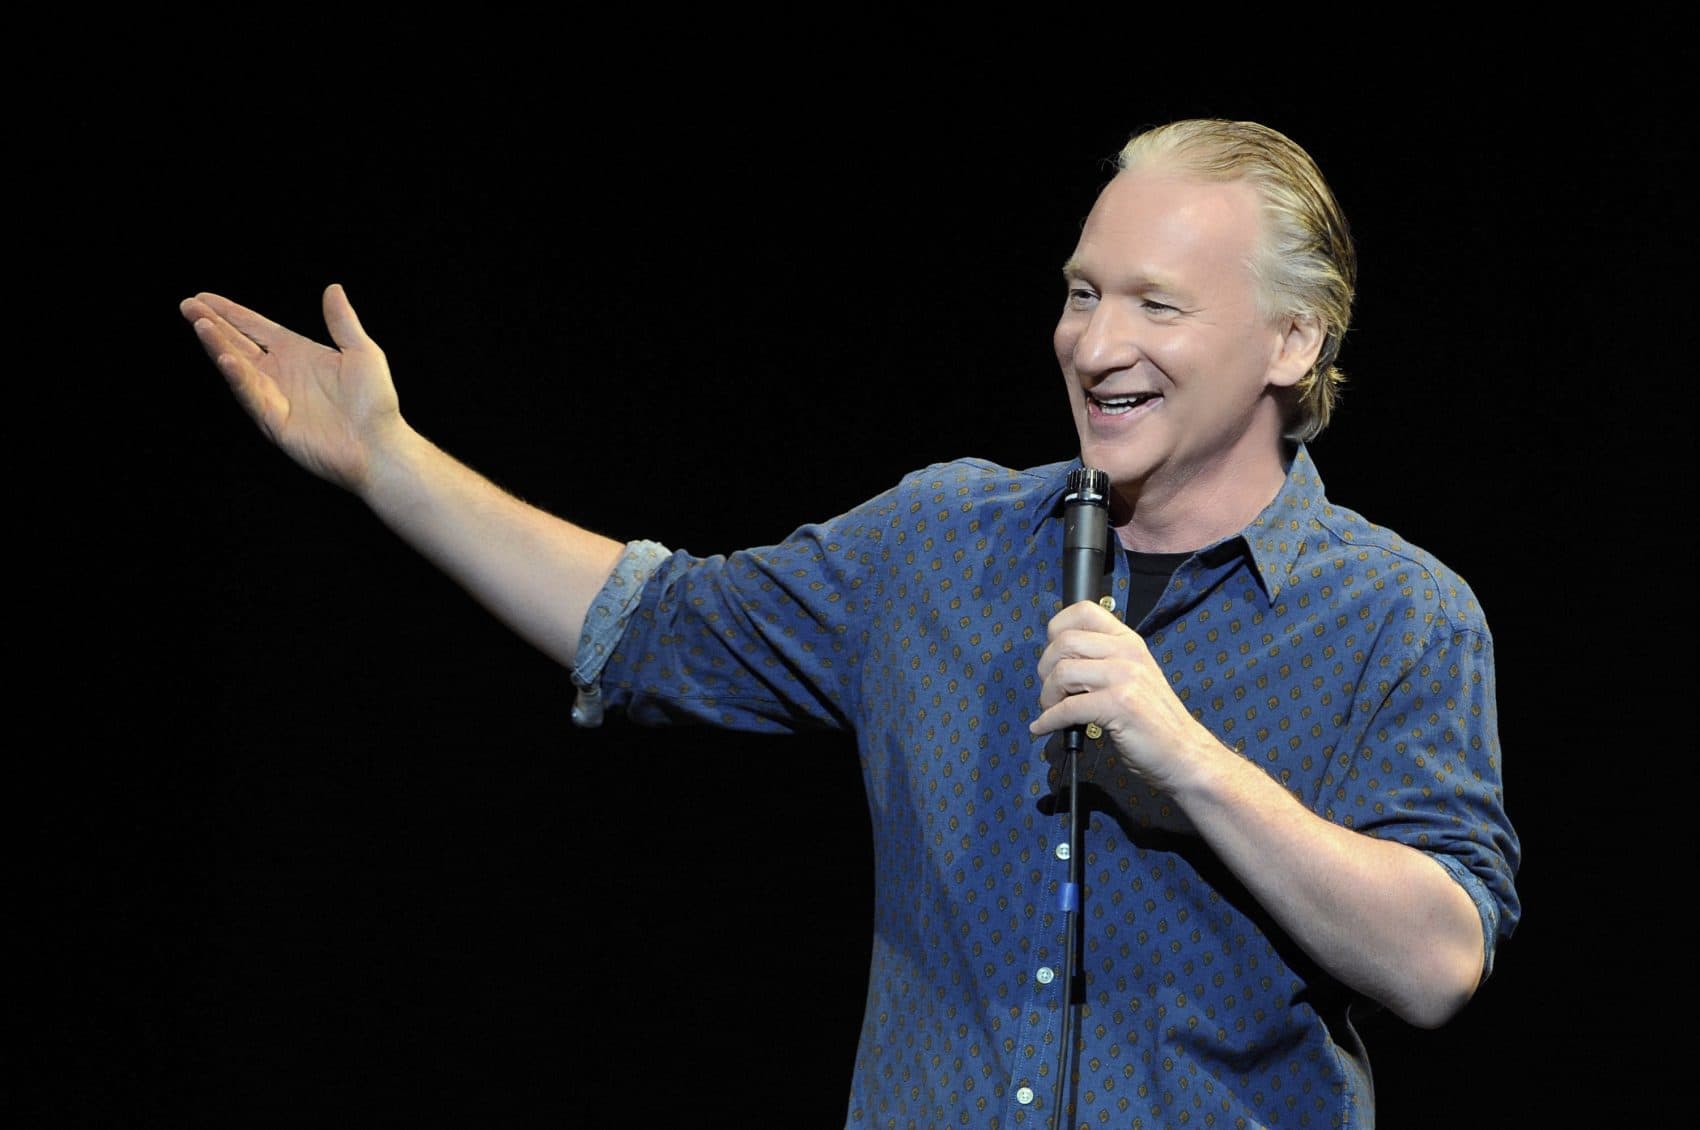 Bill Maher performs at the Palms Casino Resort in 2013 in Las Vegas. (Courtesy David Becker/WireImage)